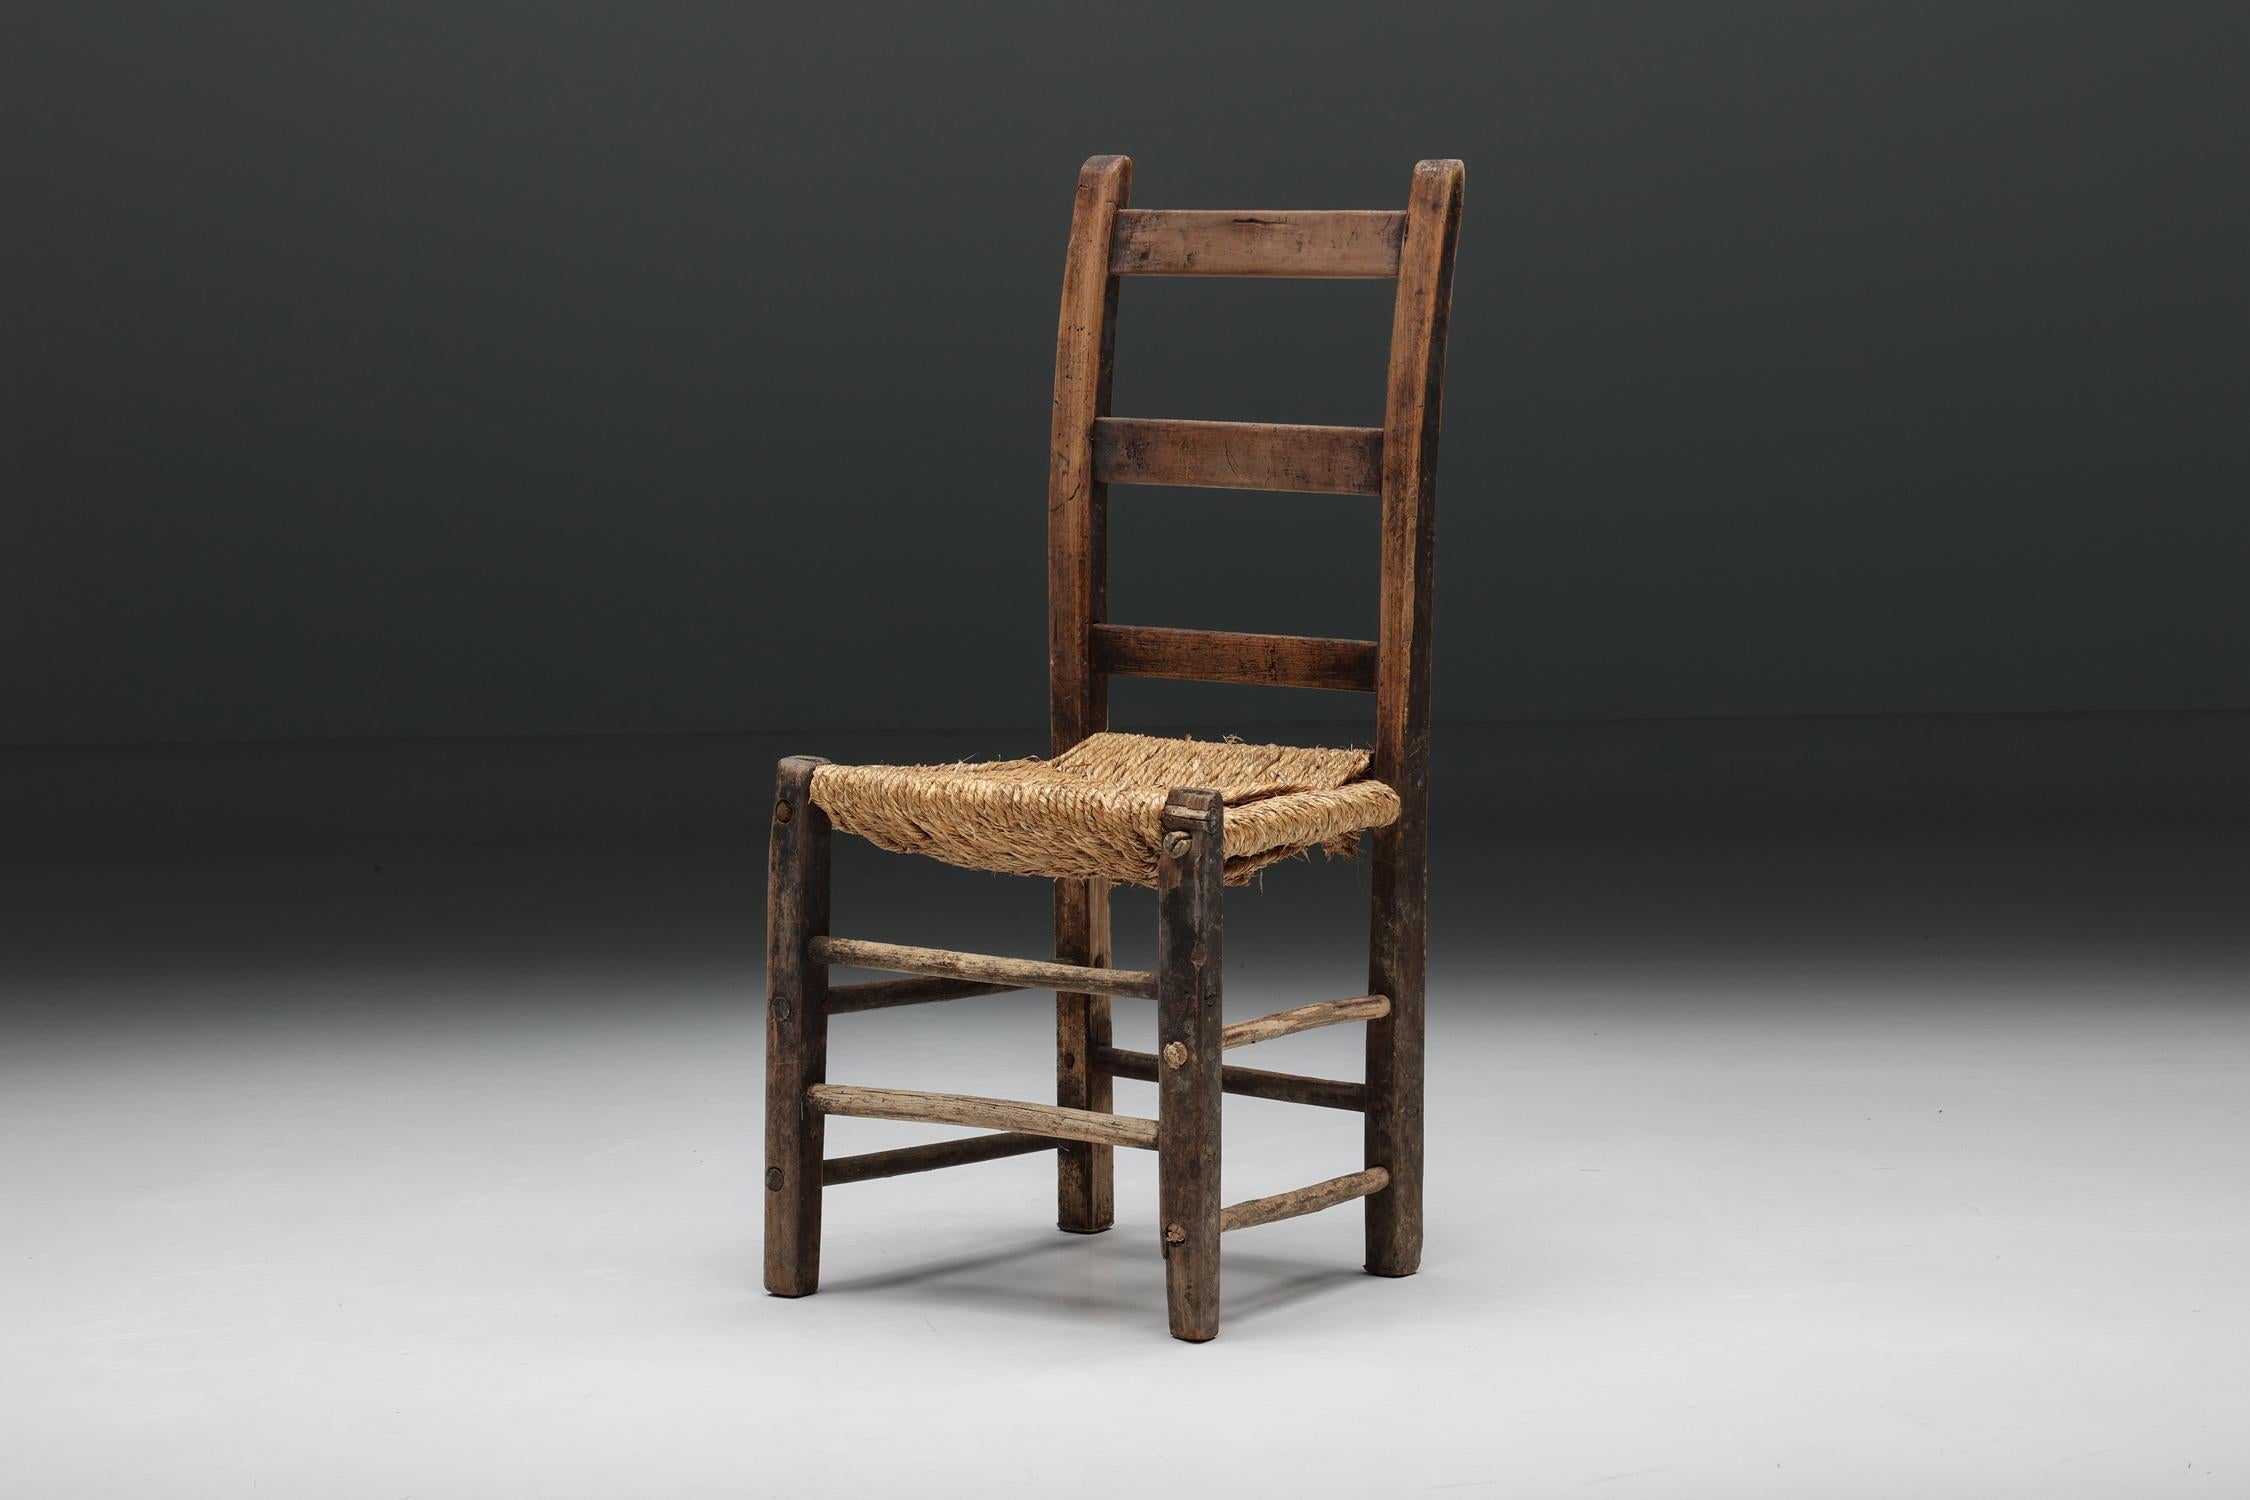 Rustic; Wood; Cord; Wabi Sabi; Rattan; dining chair; side chair; France; French Craftsmanship; 1940s; Mid-Century Modern; 

Rustic chair with comfortable cord seating and an imperfect, wabi-sabi wooden structure. A remarkable example of French